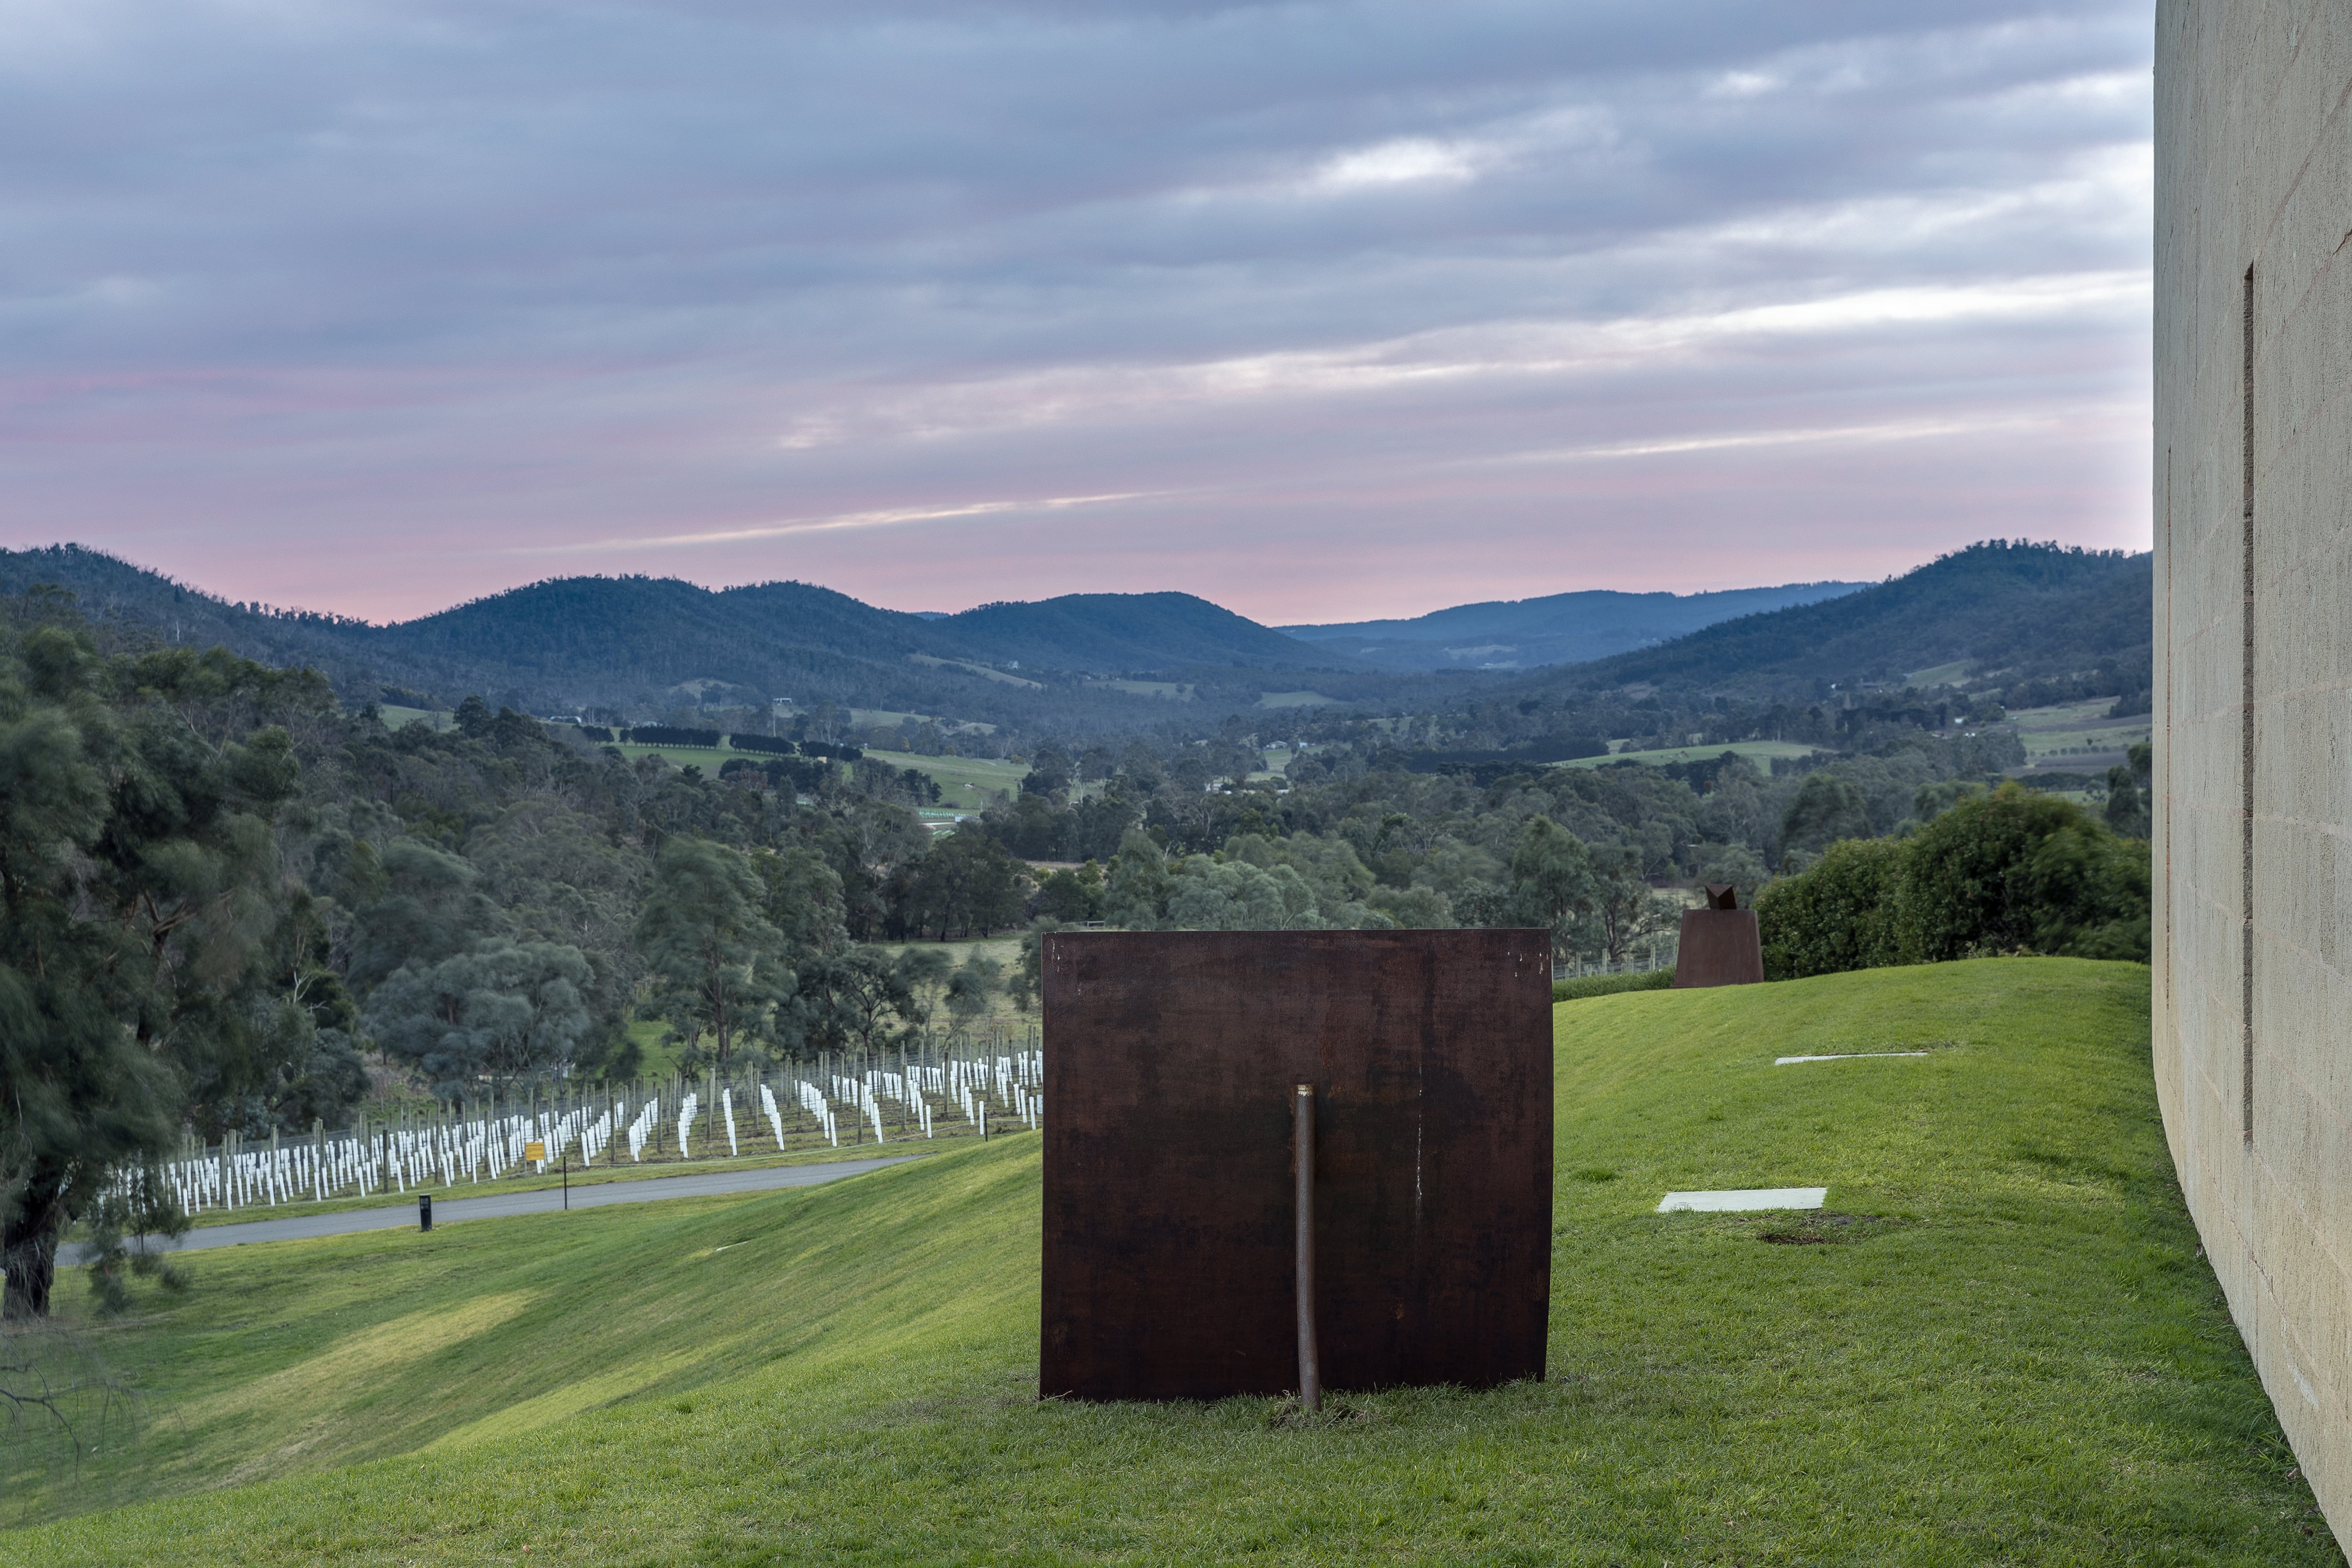 Image 04: TarraWarra  Biennial  2018:  From  Will  to  Form, installation  view  of  Michael  Snape, 'Lean  To' (2015), TarraWarra  Museum  of  Art,  2018. Courtesy  of  the  artist  and  Australian  Galleries,  Melbourne  and  Sydney.  Photo: Andrew  Curtis.